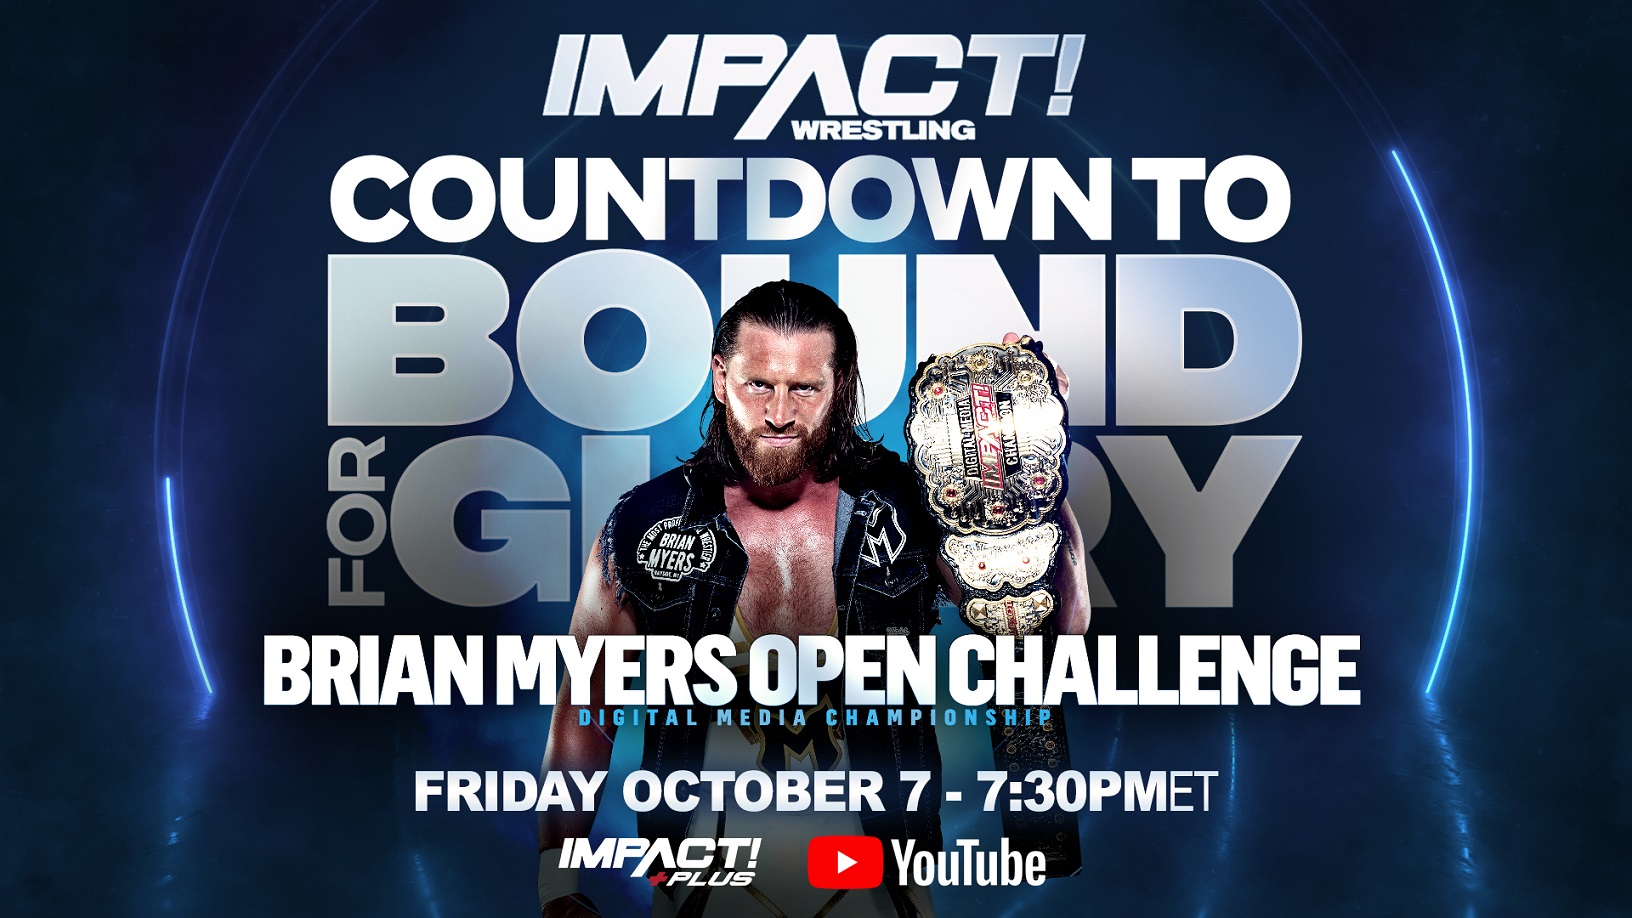 Brian Myers Issues a Digital Media Title Open Challenge on Countdown to Bound For Glory